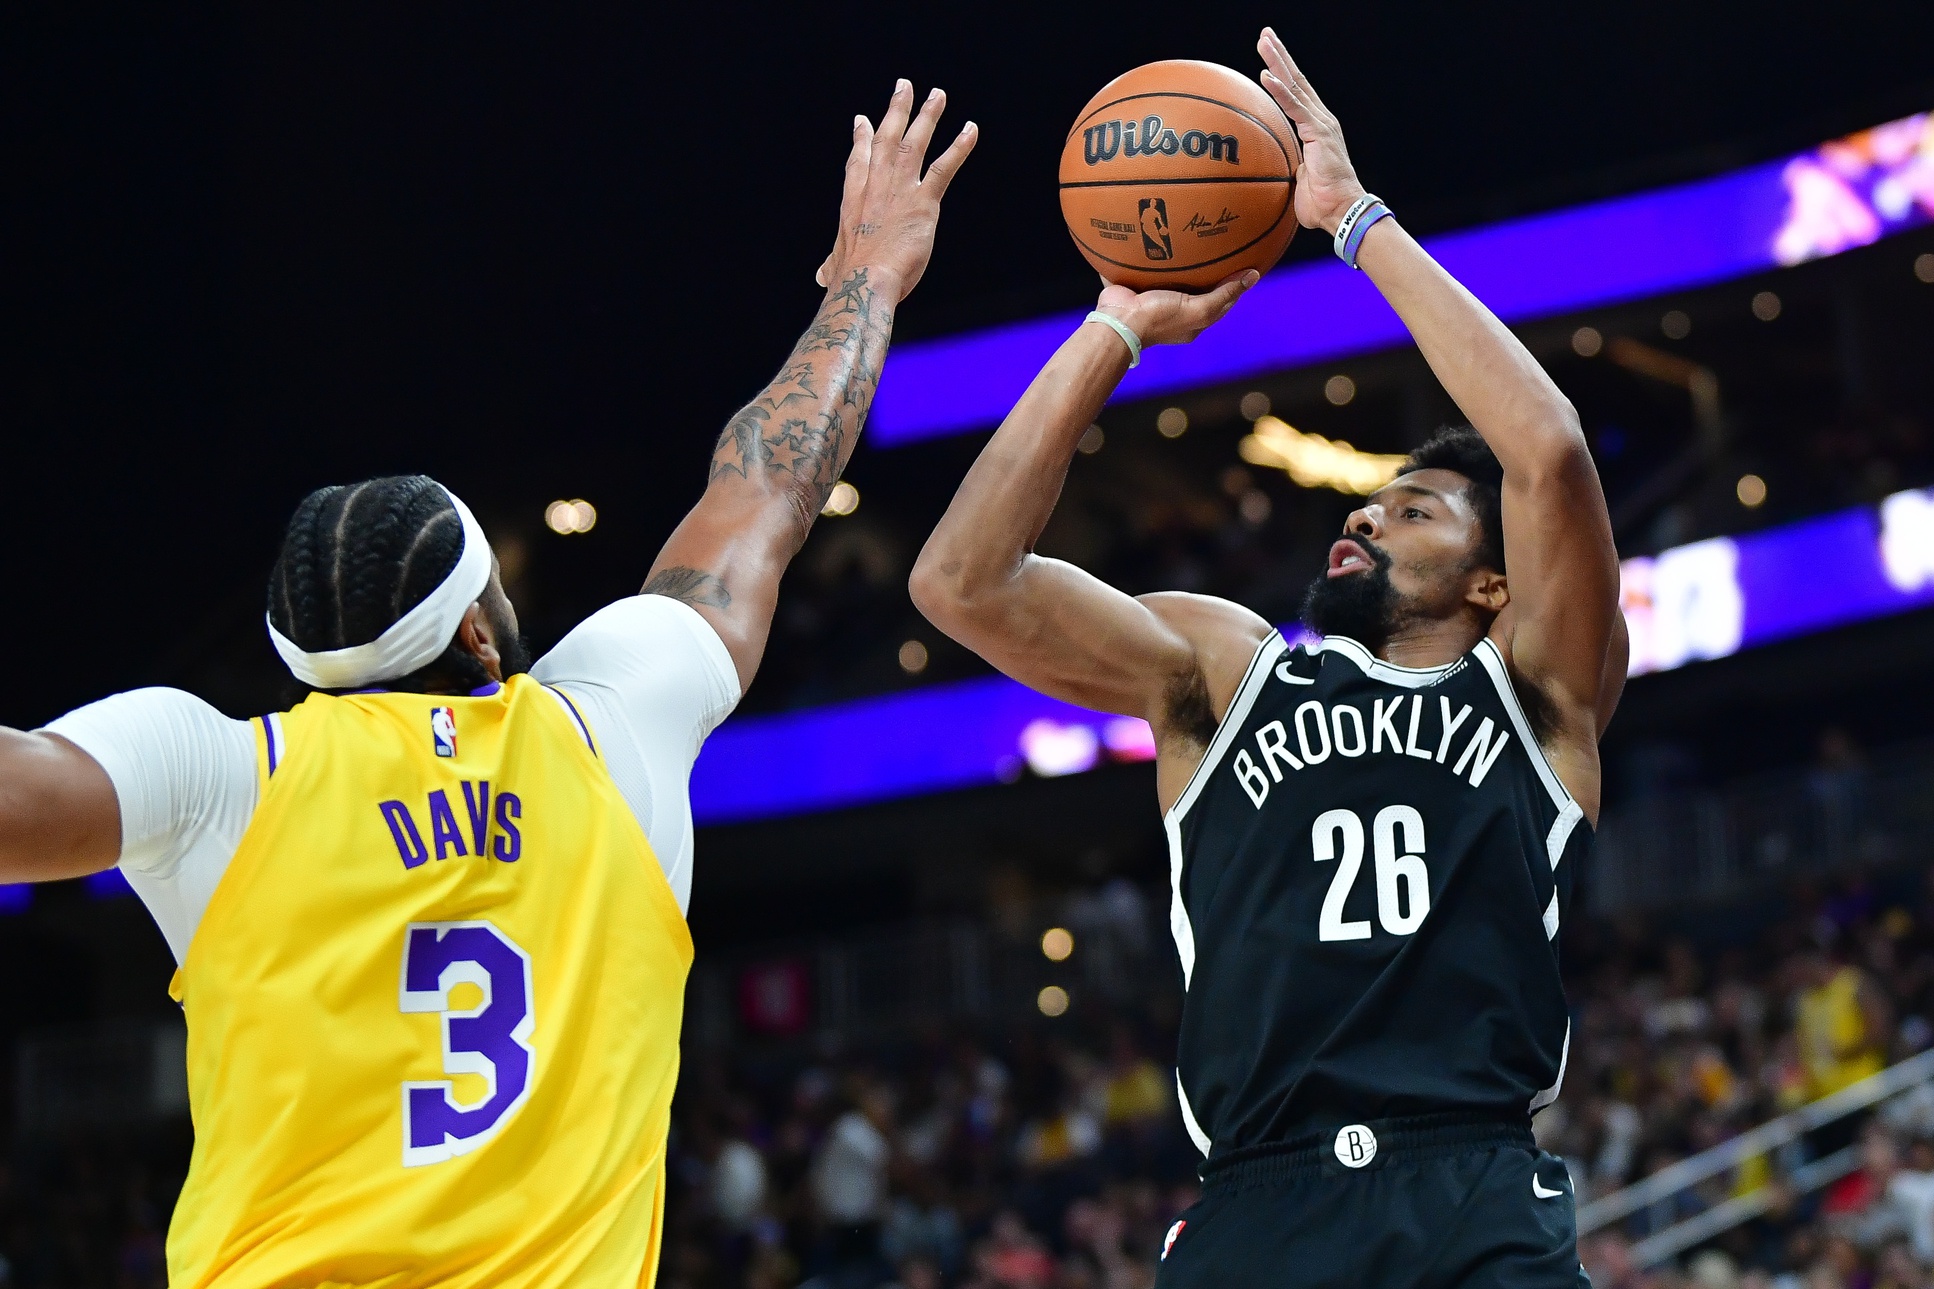 Brooklyn Nets guard Spencer Dinwiddie (26) shoots against Los Angeles Lakers forward Anthony Davis (3) during the first half at T-Mobile Arena.